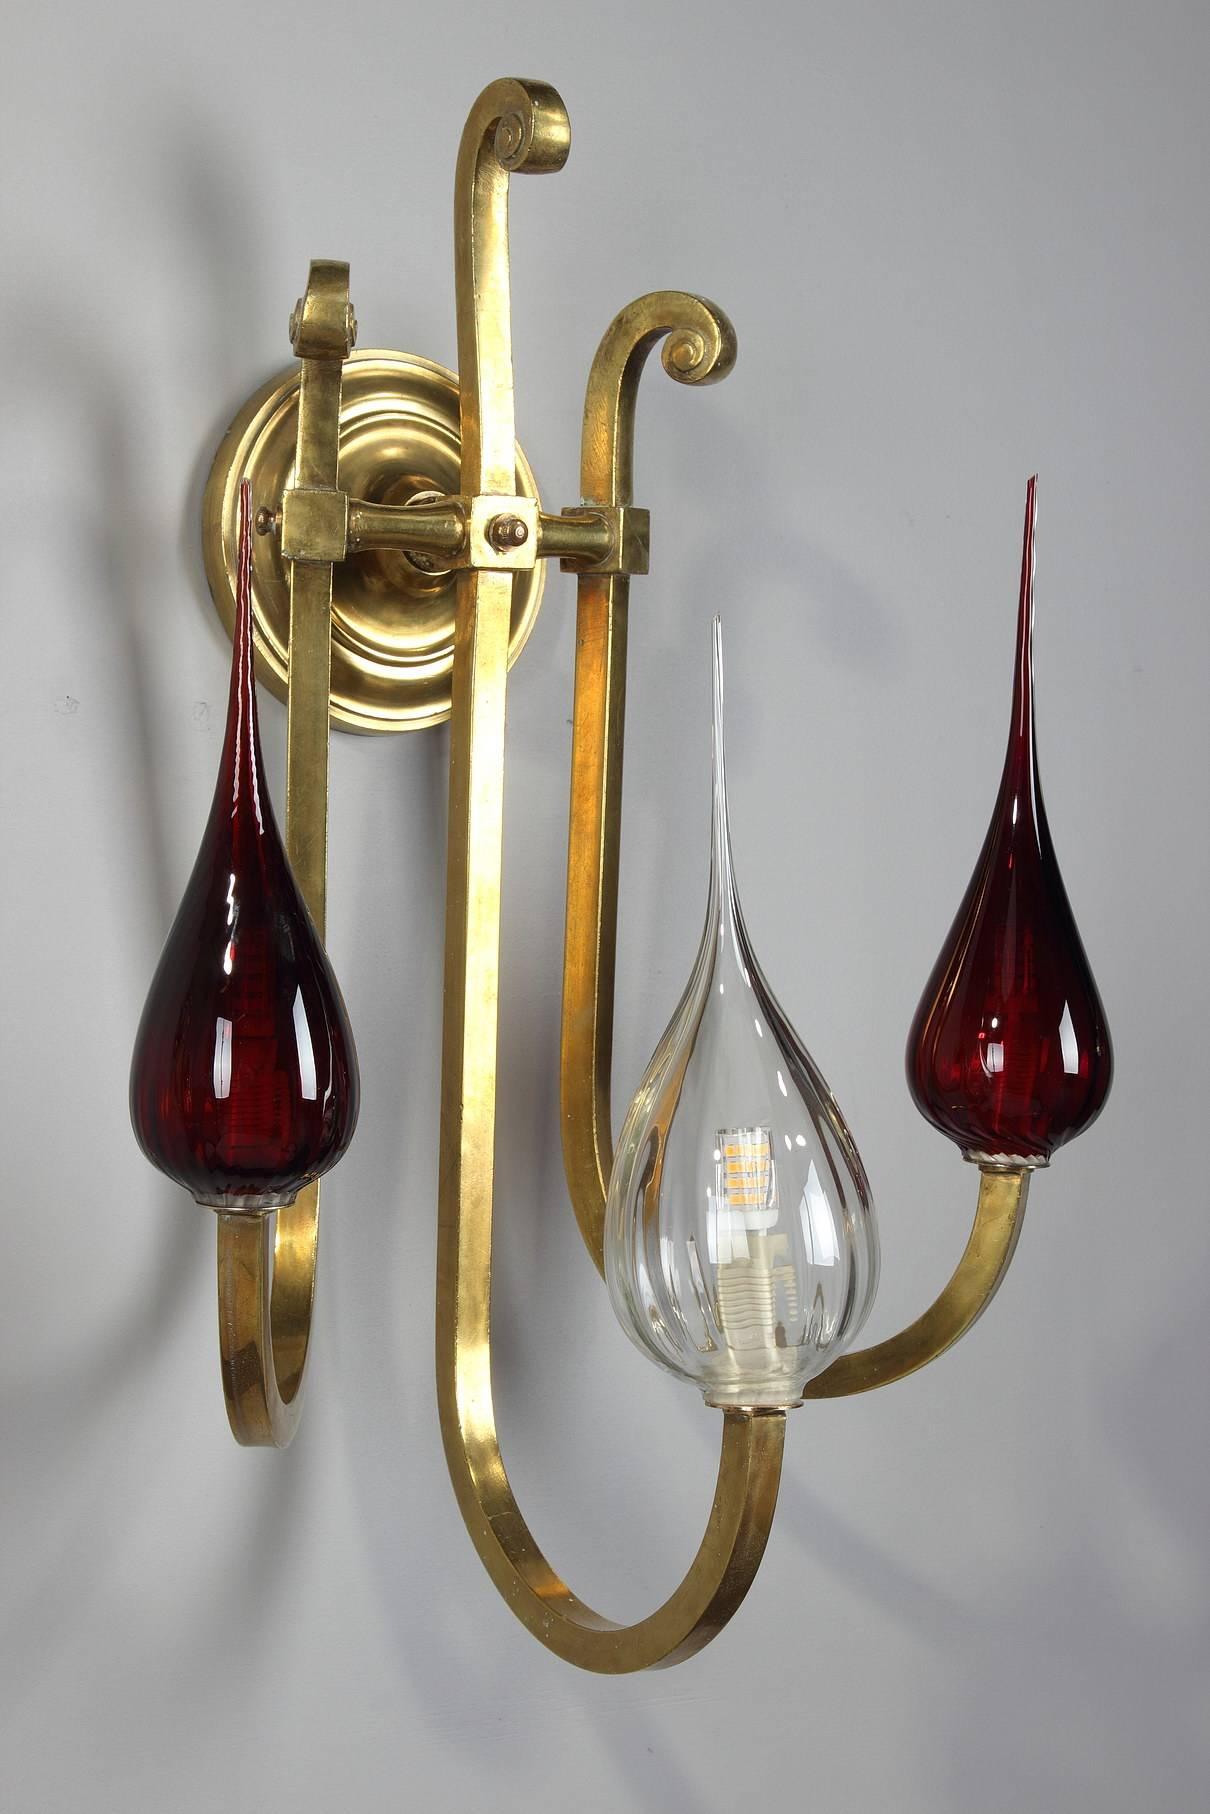 Gilded brass sconce with three scrolled arms of light fixed on the wall with a fluted rosette. Glass and red opaline drop-shaped globes. Art Deco mounts and contemporary glass globes,

circa 1940.
Dimensions: W 14.2 inches, D 9.4 inches, H 21.7